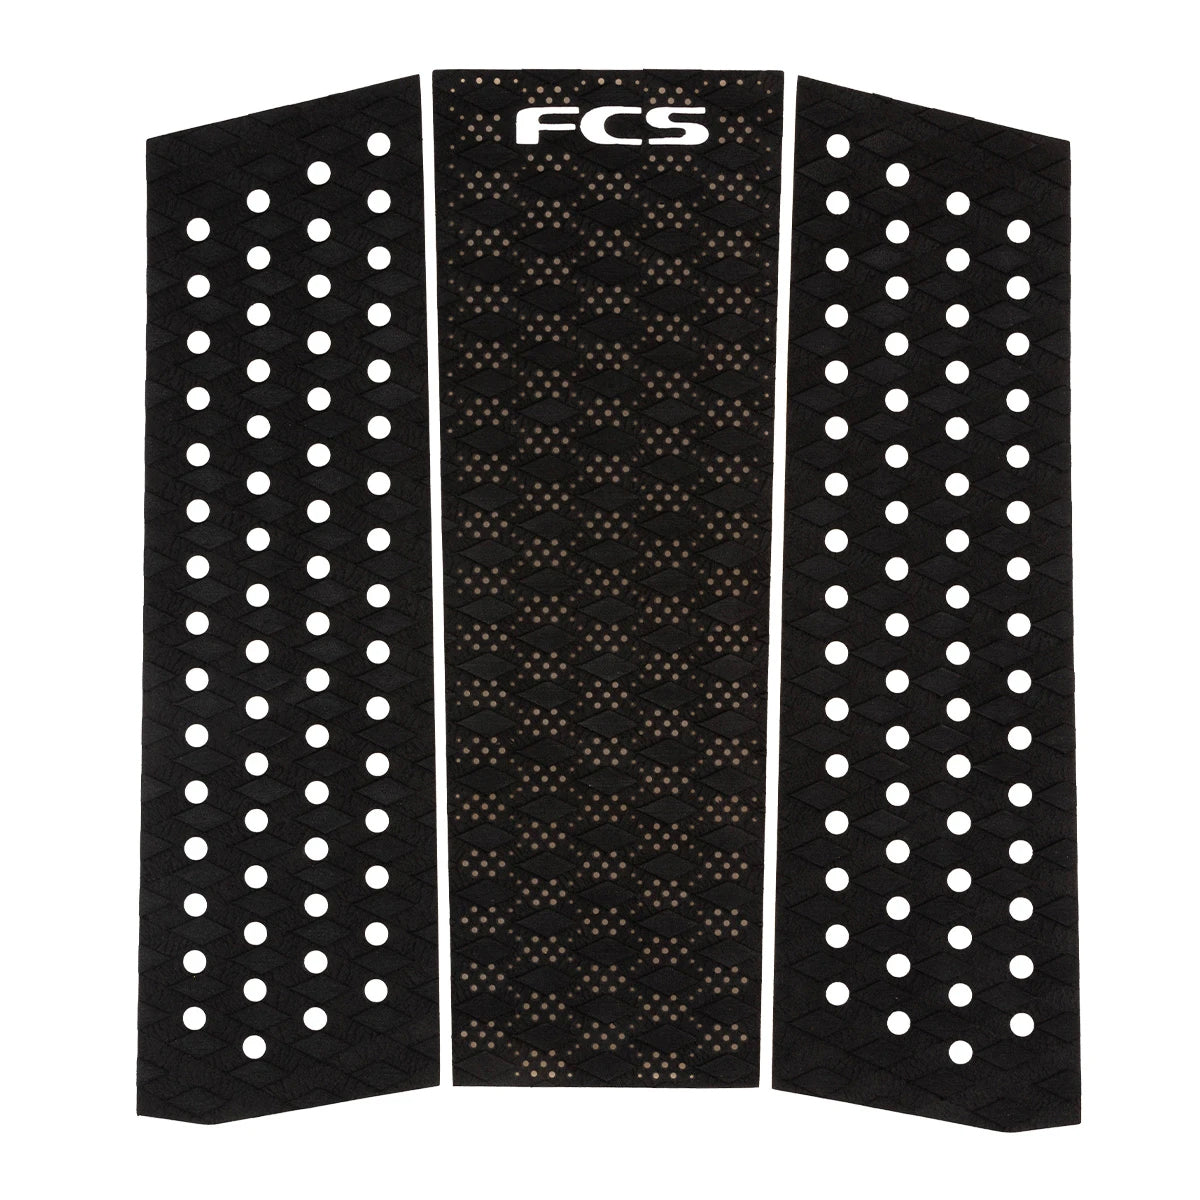 FCS T3 Mid Traction Black